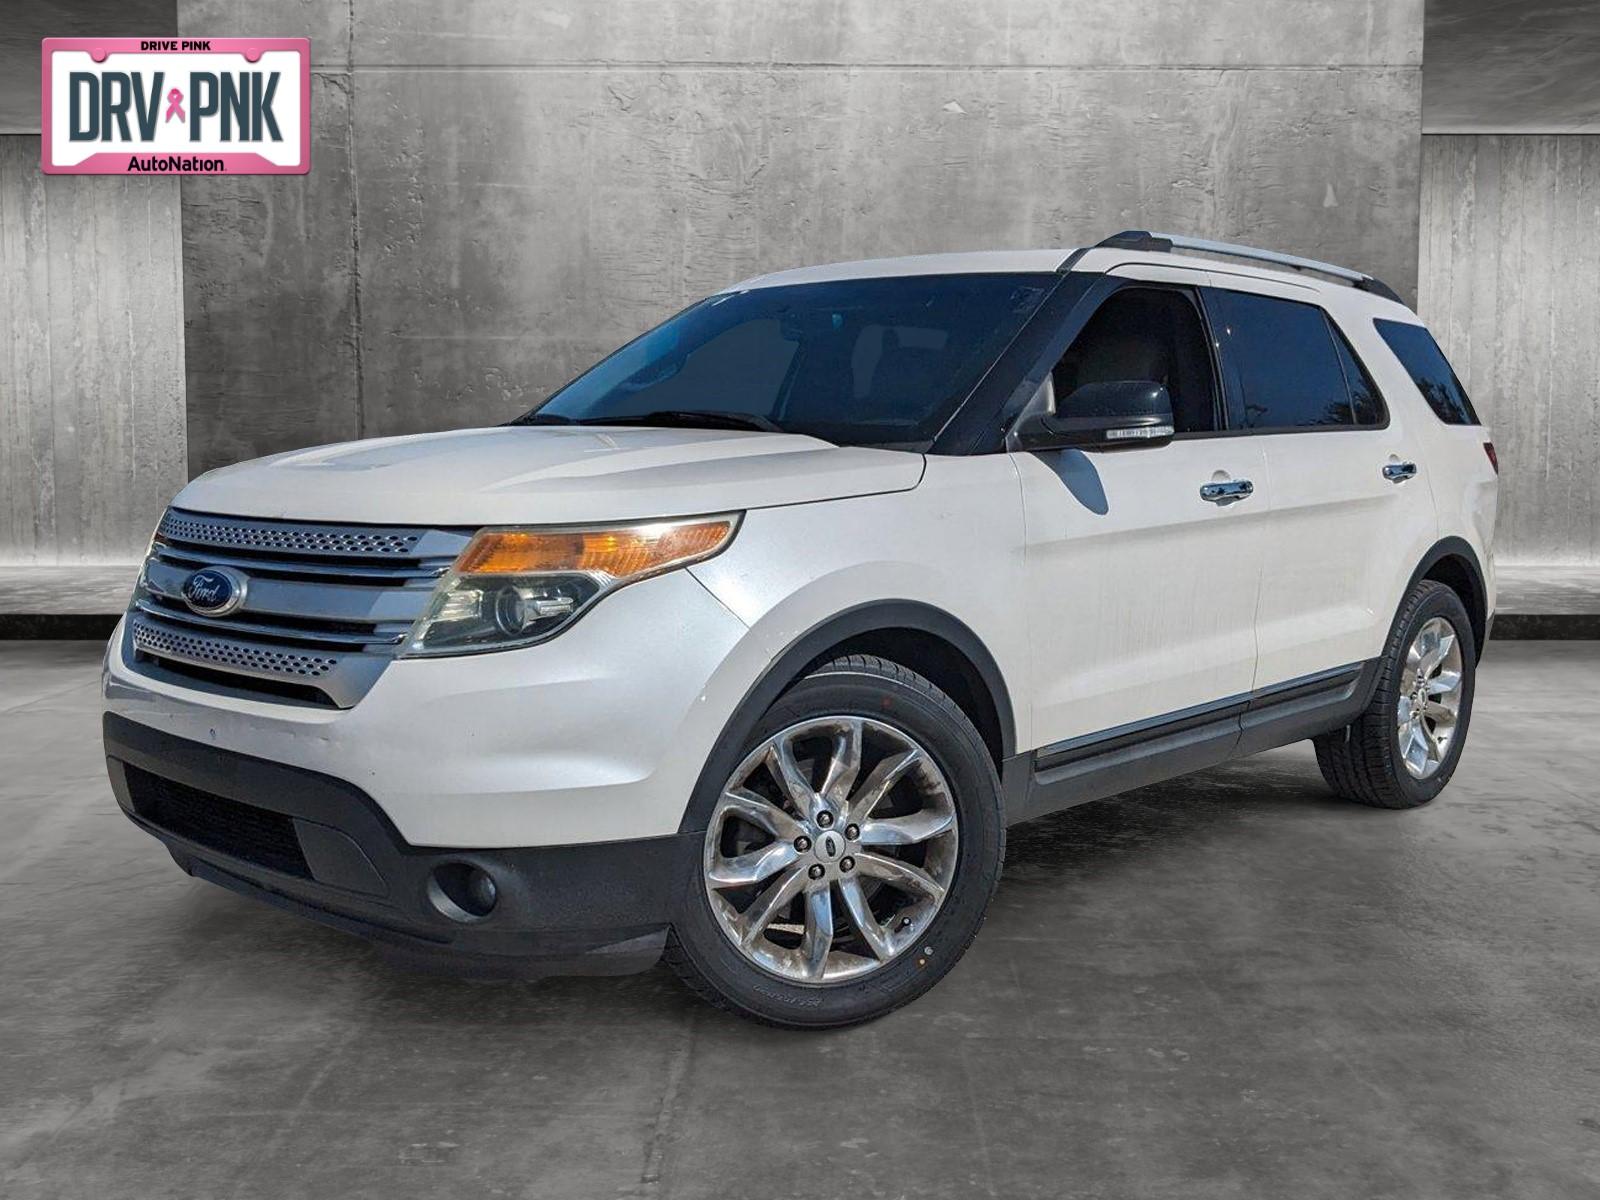 2014 Ford Explorer Vehicle Photo in Winter Park, FL 32792